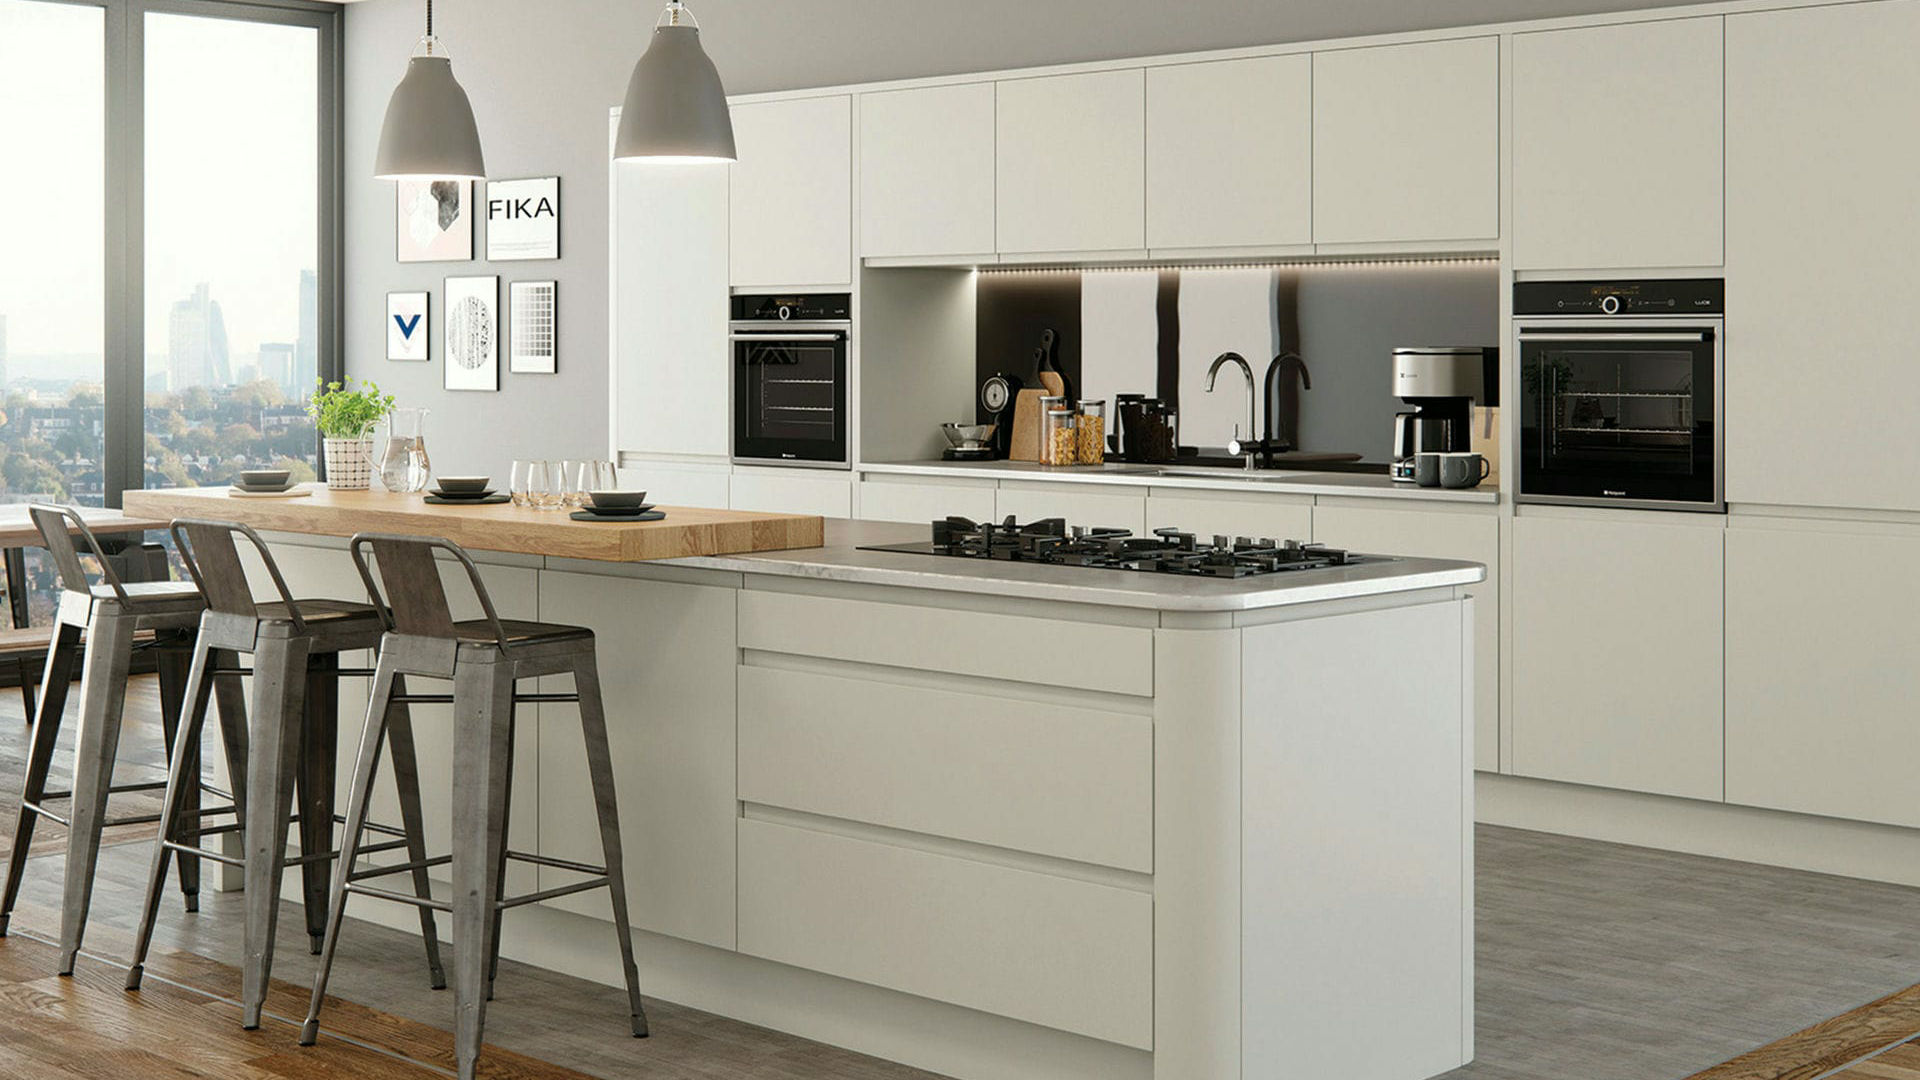 Handleless matt porcelain kitchens featuring a sophisticated, understated look for contemporary designs